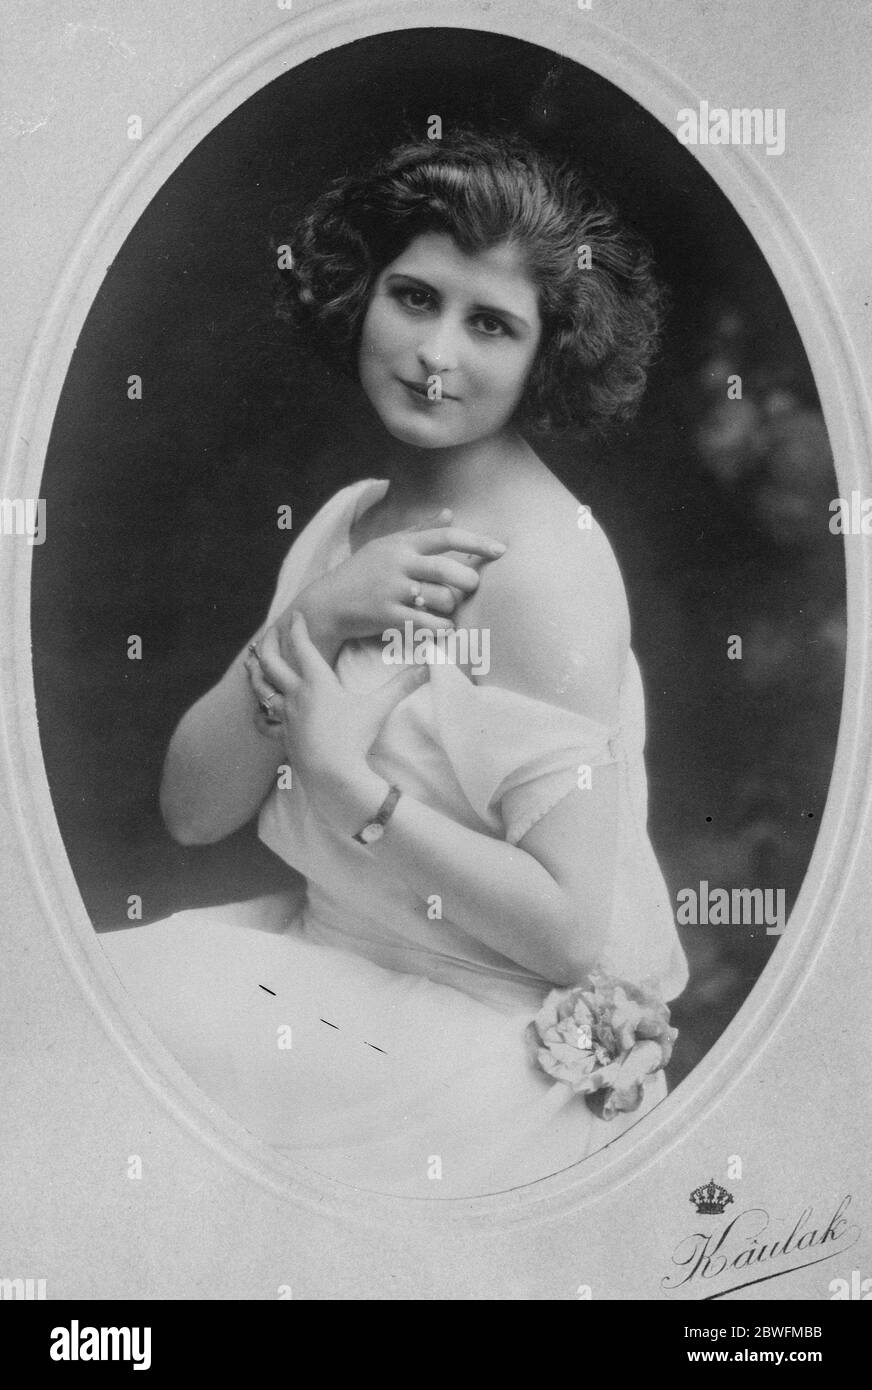 A Royal introduction . Described by the Queen of Italy as the prettiest girl she had ever seen . Senorita M L Canovas , has following a holiday with the Italian Roayl family , become engaged to Count A Costagnta . Senorita Maria Louisa Canovas . 18 September 1926 Stock Photo